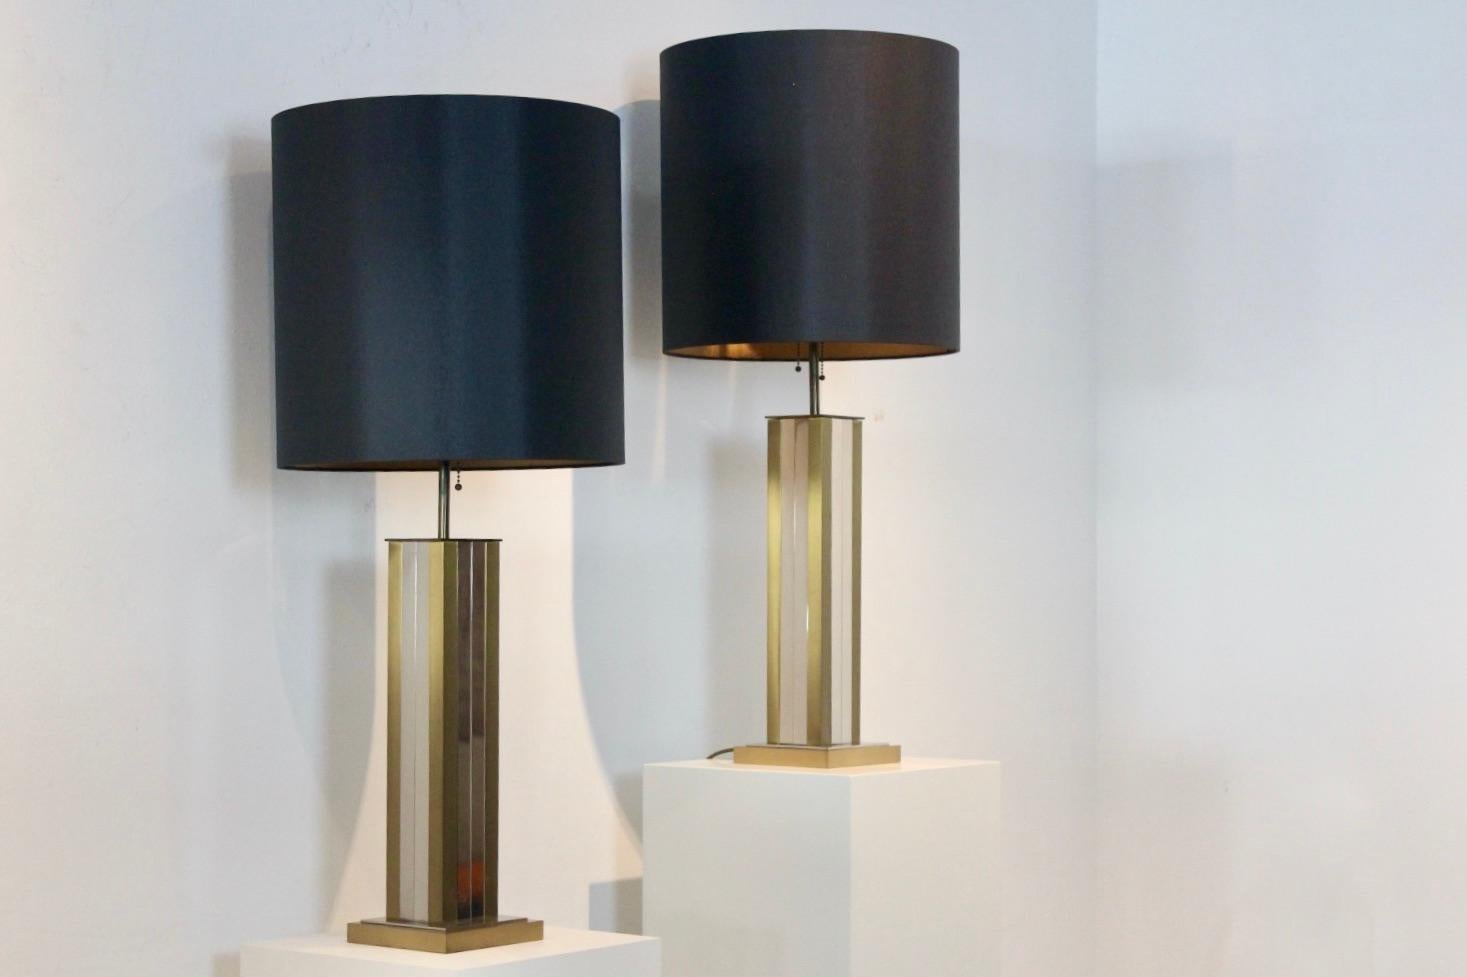 Beautiful pair of large brass and chrome midcentury table lamps from the 1970s by Willy Rizzo. The set is unique and has a glamorous appearance and has 2-light per lamp. The beautiful shades are new and give a very sophisticated and warm light with